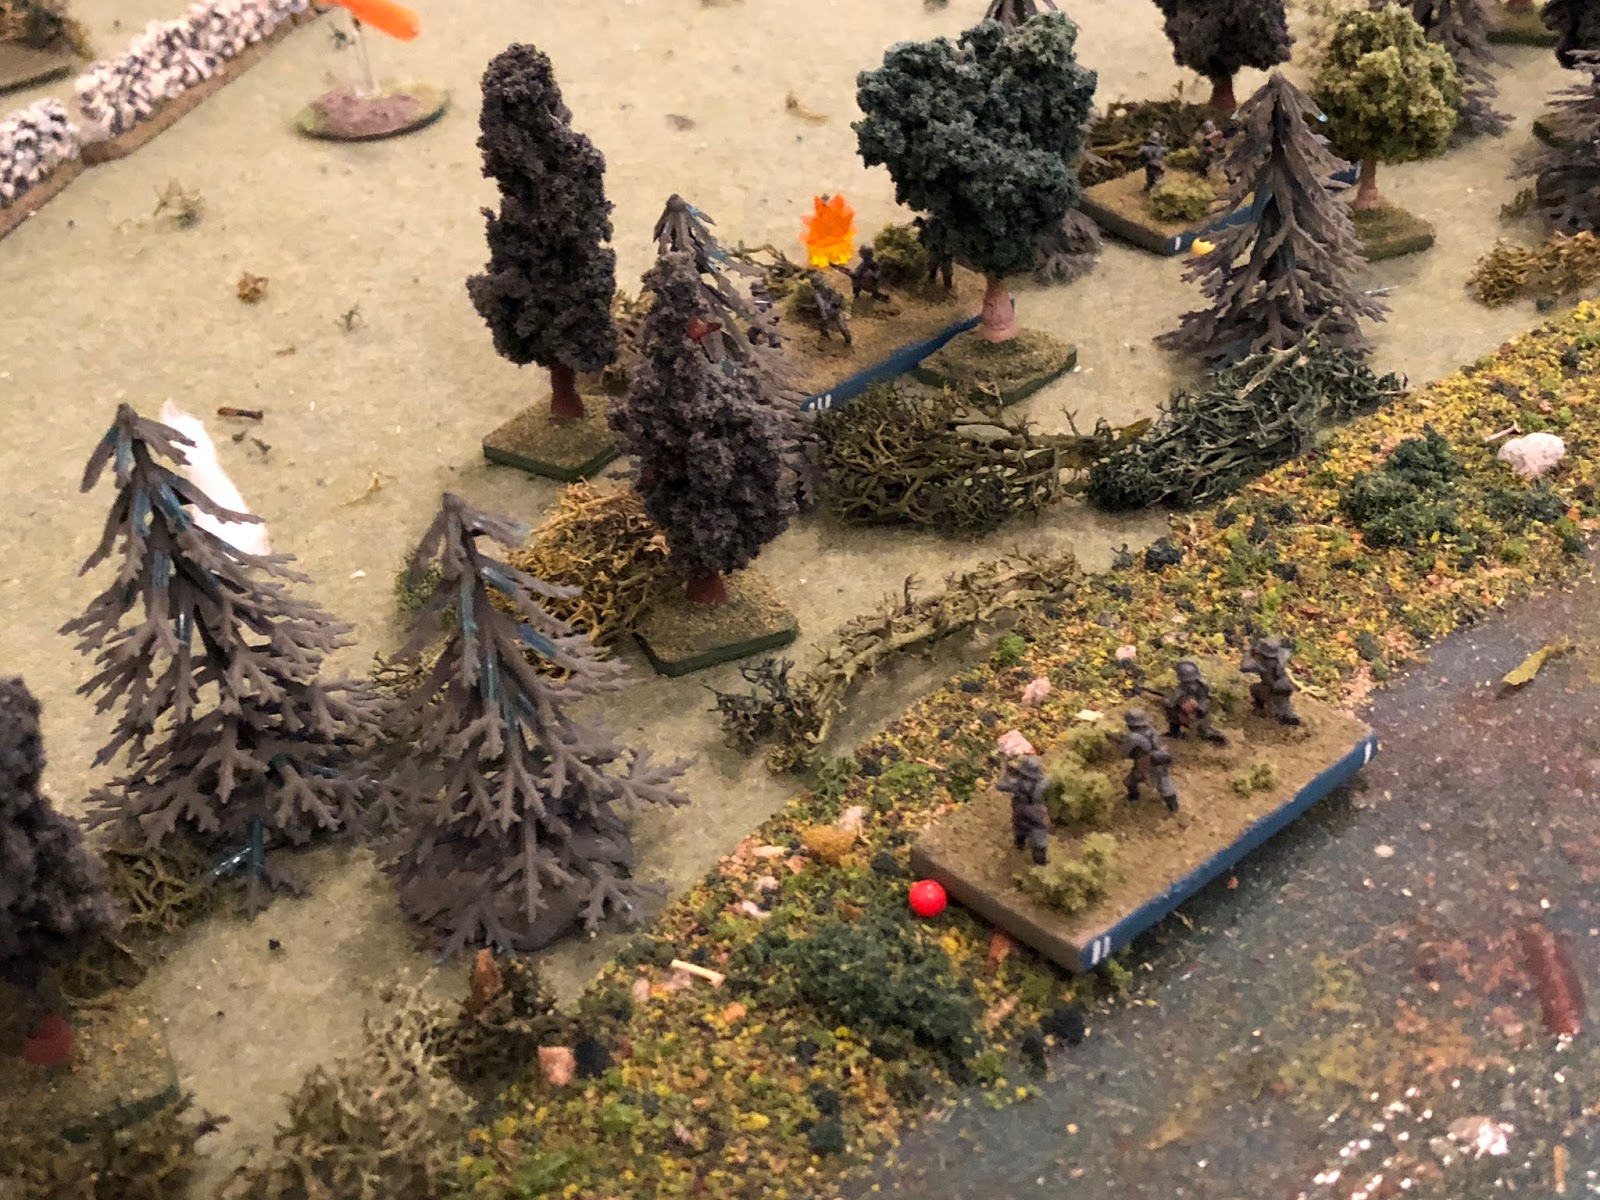  But the French infantry and tank fire is a bit much for them so they fall back to the river.  If they fail again they will drop their weapons and swim for it, escaping to fight another day, but hoping Colonel Klink doesn't find out about it, lest th